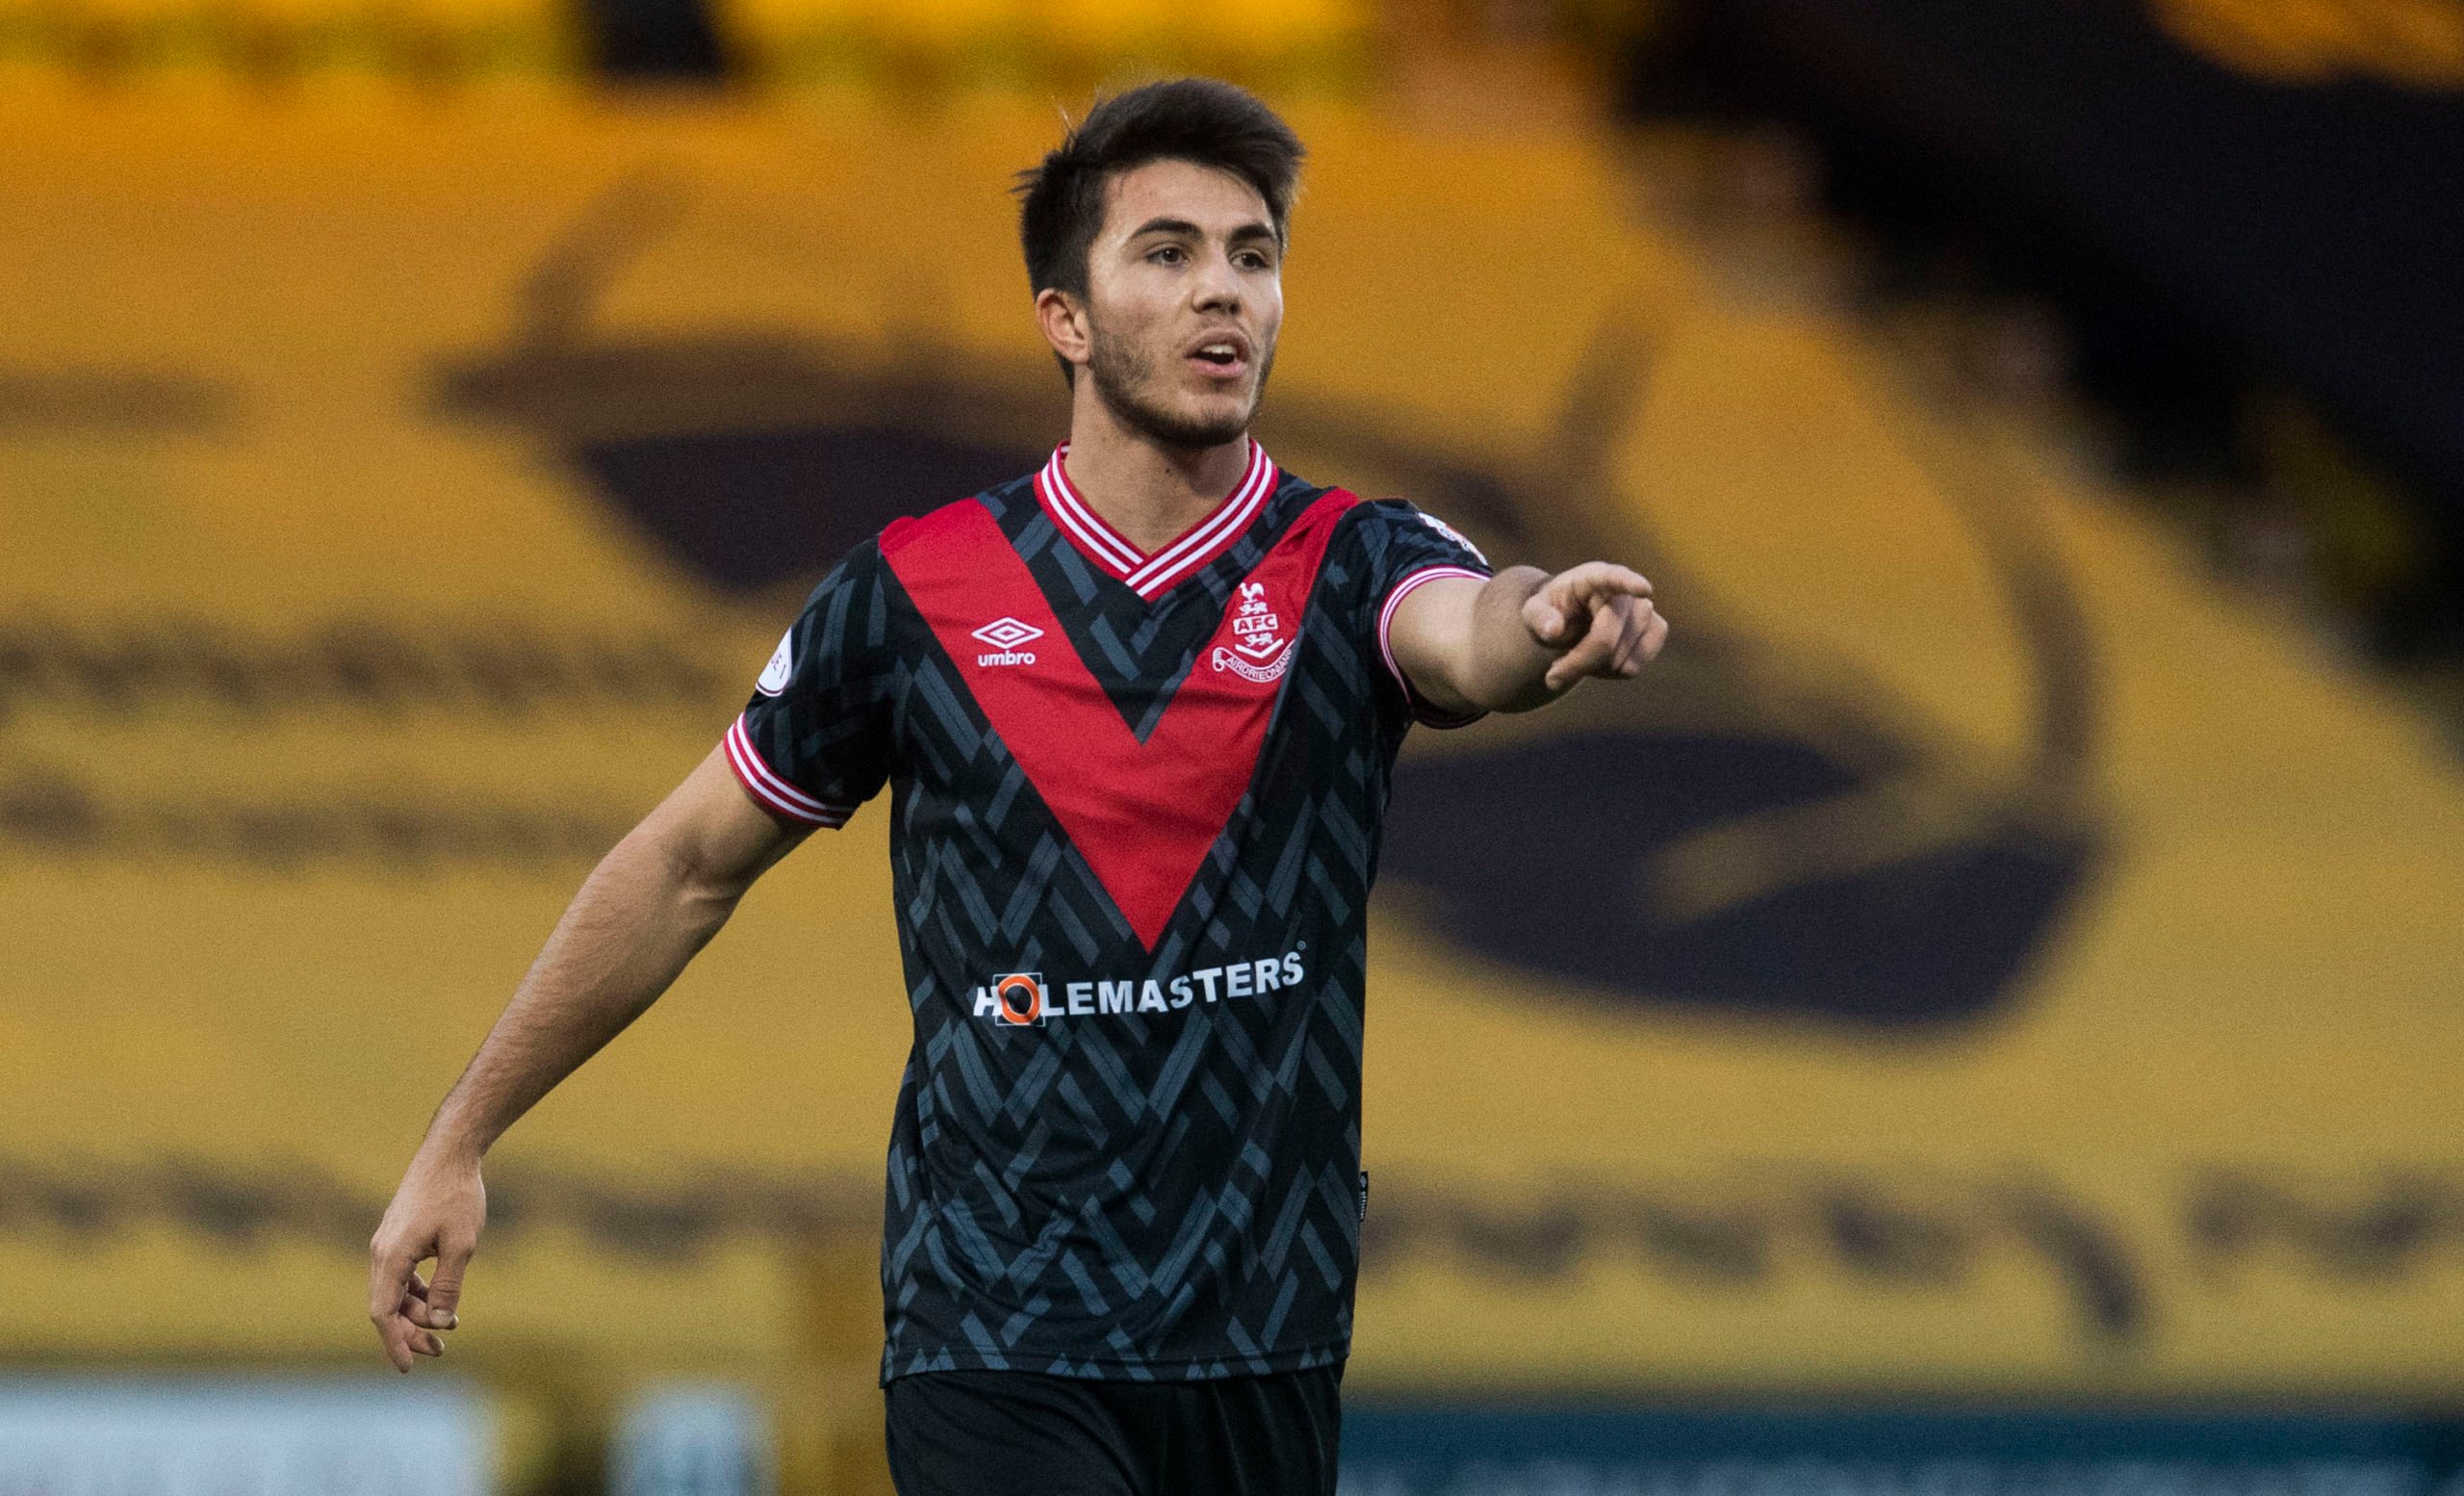 Airdrie's Director of Football opens up on Celtic target Thomas Robert